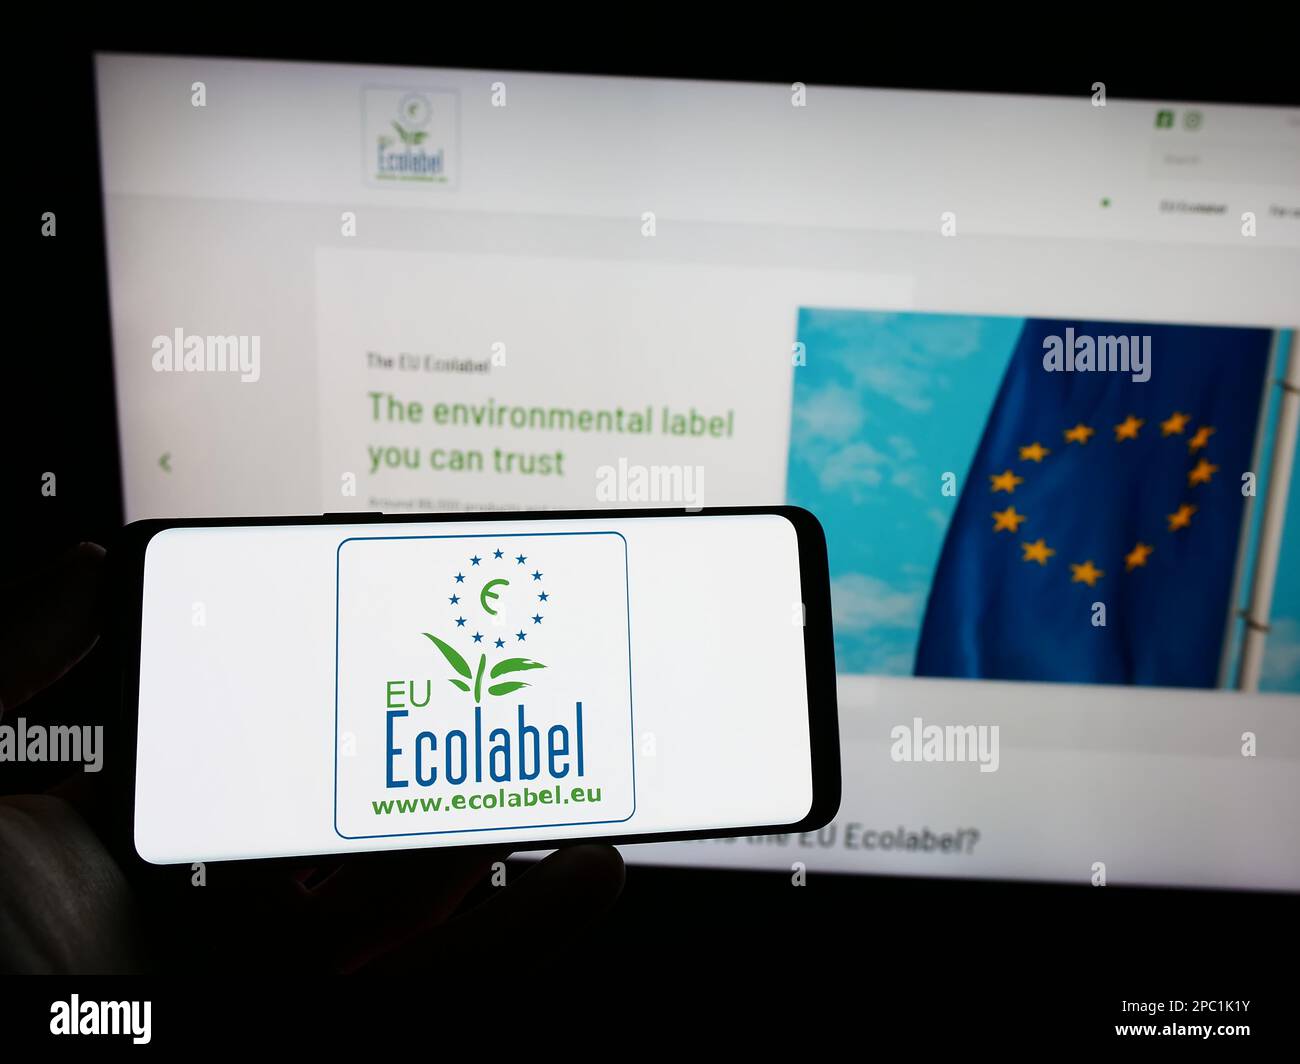 Person holding cellphone with logo of environmental certification EU Ecolabel on screen in front of webpage. Focus on phone display. Stock Photo